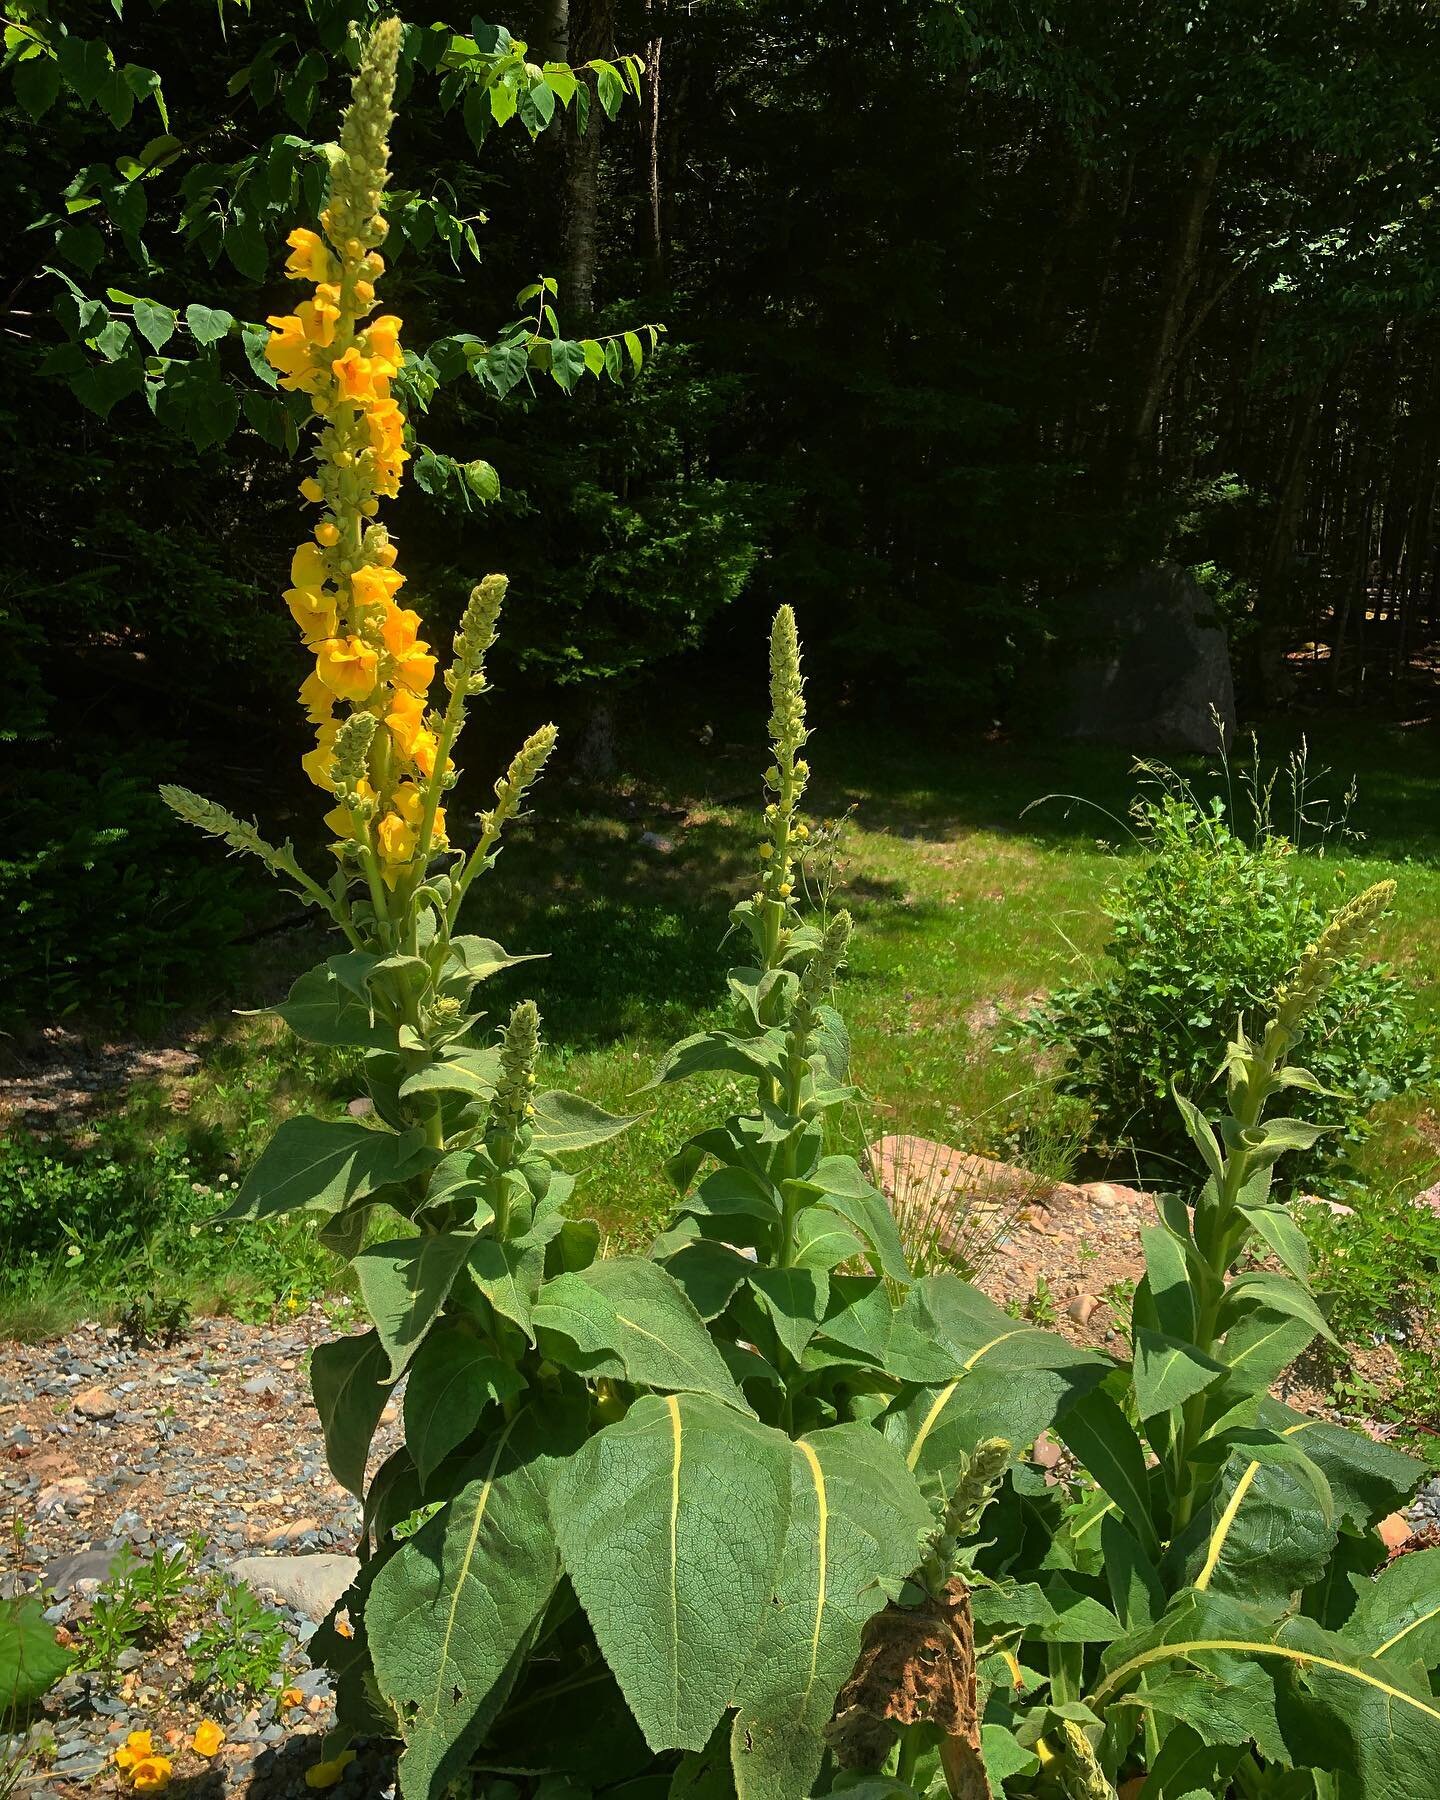 Challenges bring growth, expansion, and beauty is what this Mullein has showed me. The ability to adapt and be resilient is important. It started as one stalk that was starting to grow on the edge of a gravel parking lot. It was ran into by a car whi